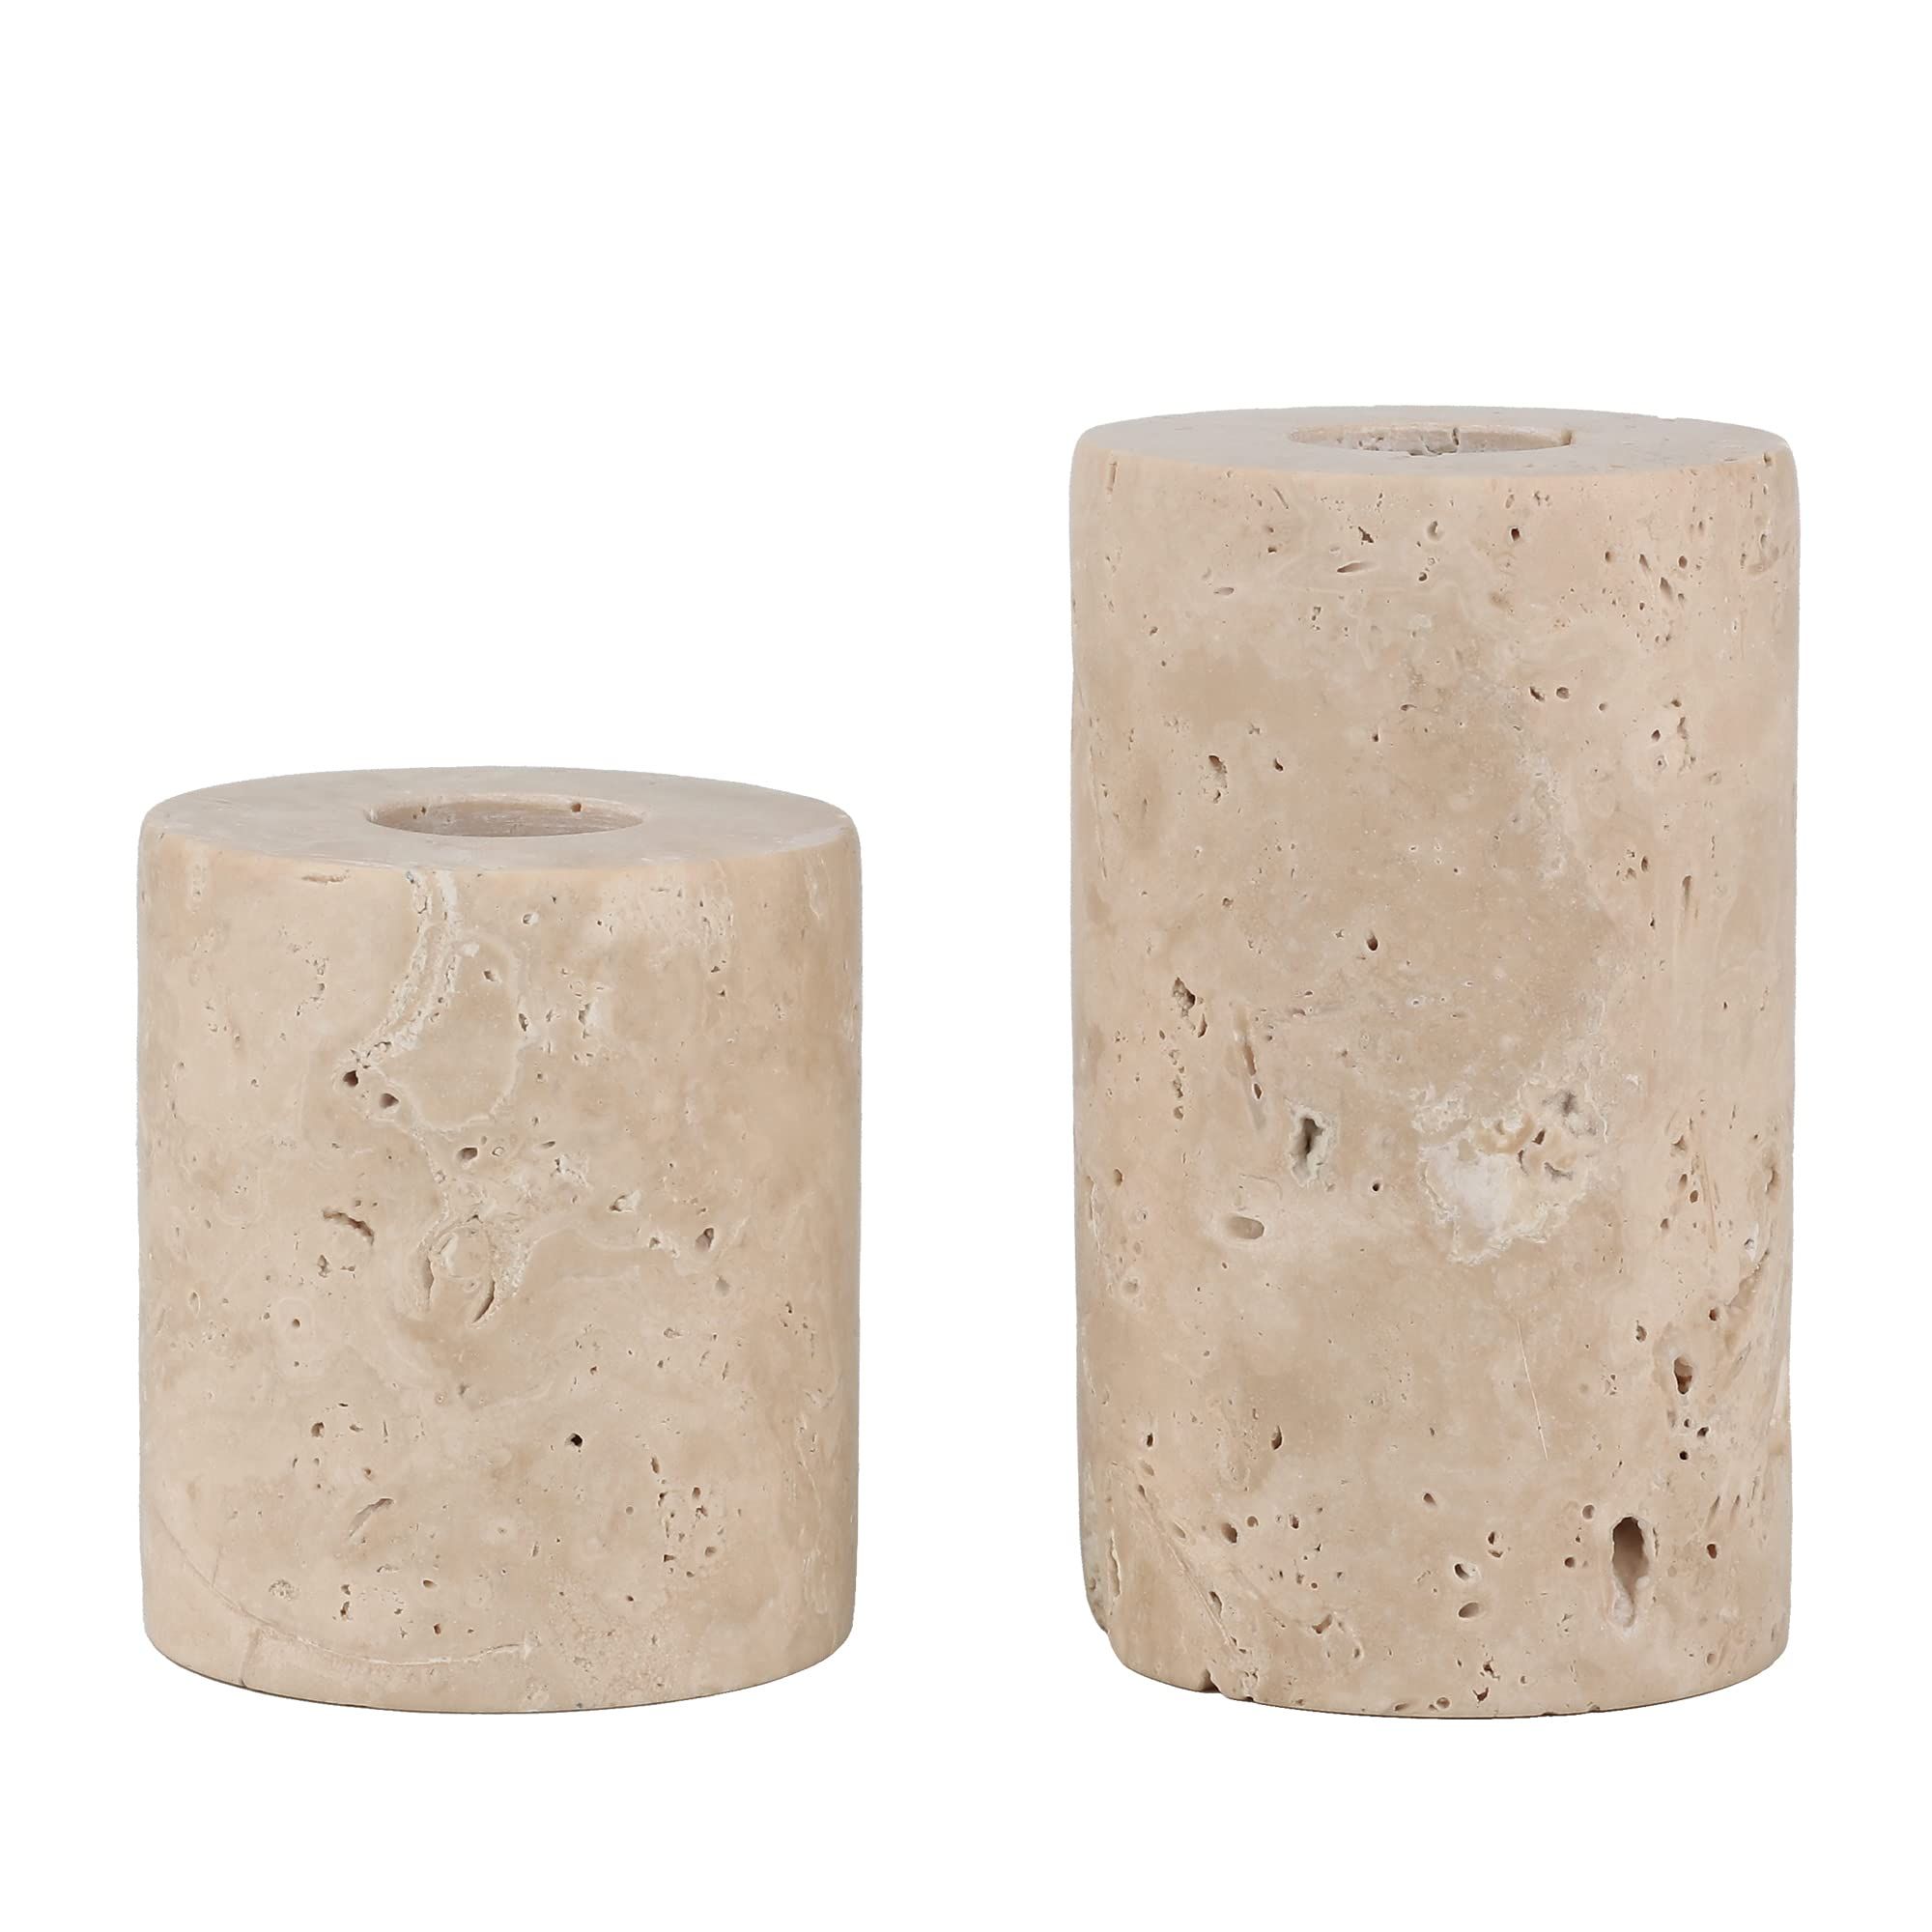 WORHE Candle Holders True Natural Marble Set of 2 Decorative Candlestick Holder for Home Dinning Par | Amazon (US)